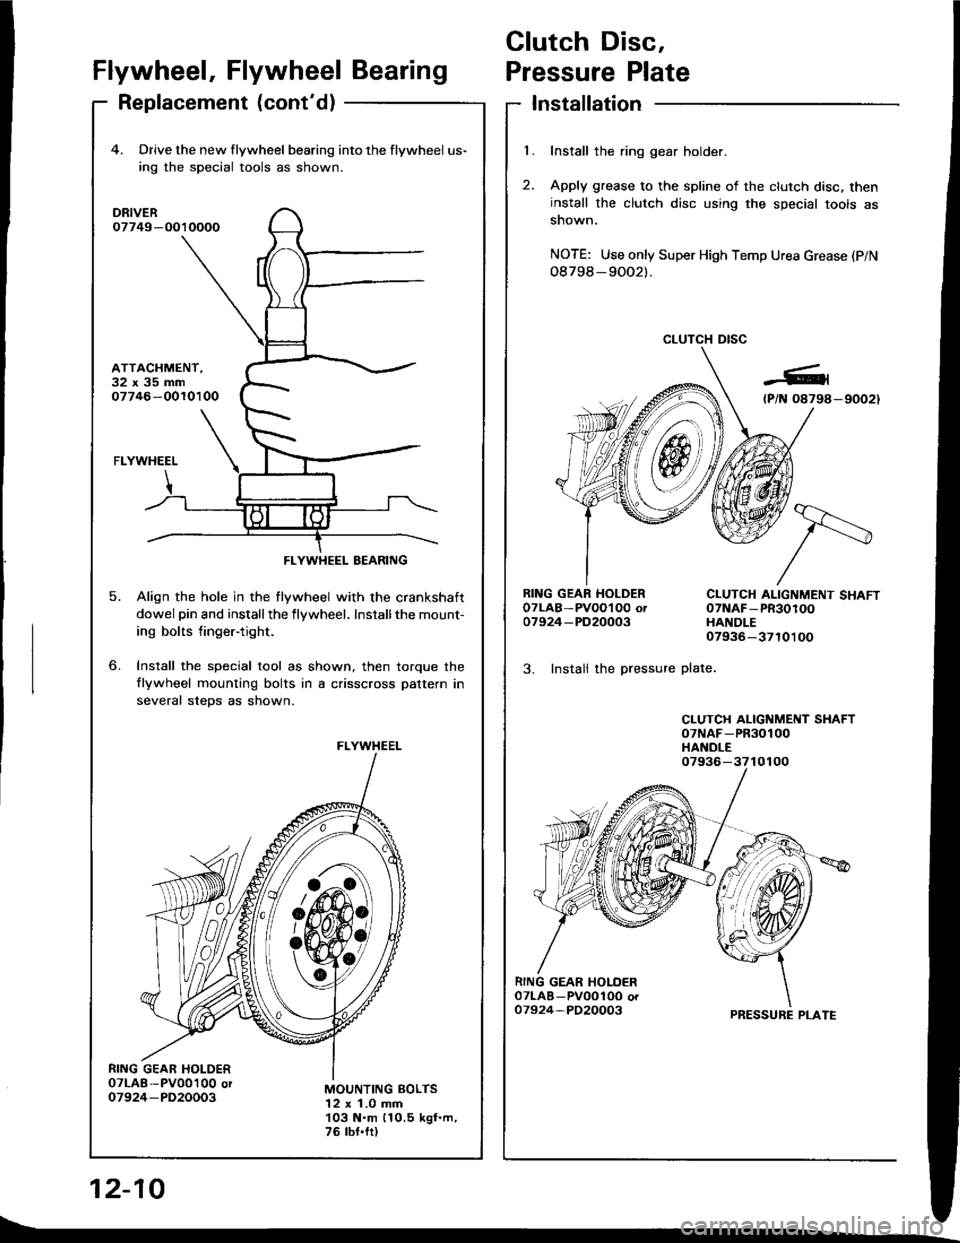 HONDA INTEGRA 1994 4.G Workshop Manual Clutch Disc,
l.
t
Flywheel, Flywheel BearingPressure Plate
Replacement (contd)Installation
Install the ring gear holder.
Apply grease to the spline of the clutch disc, theninstall the clutch disc usi